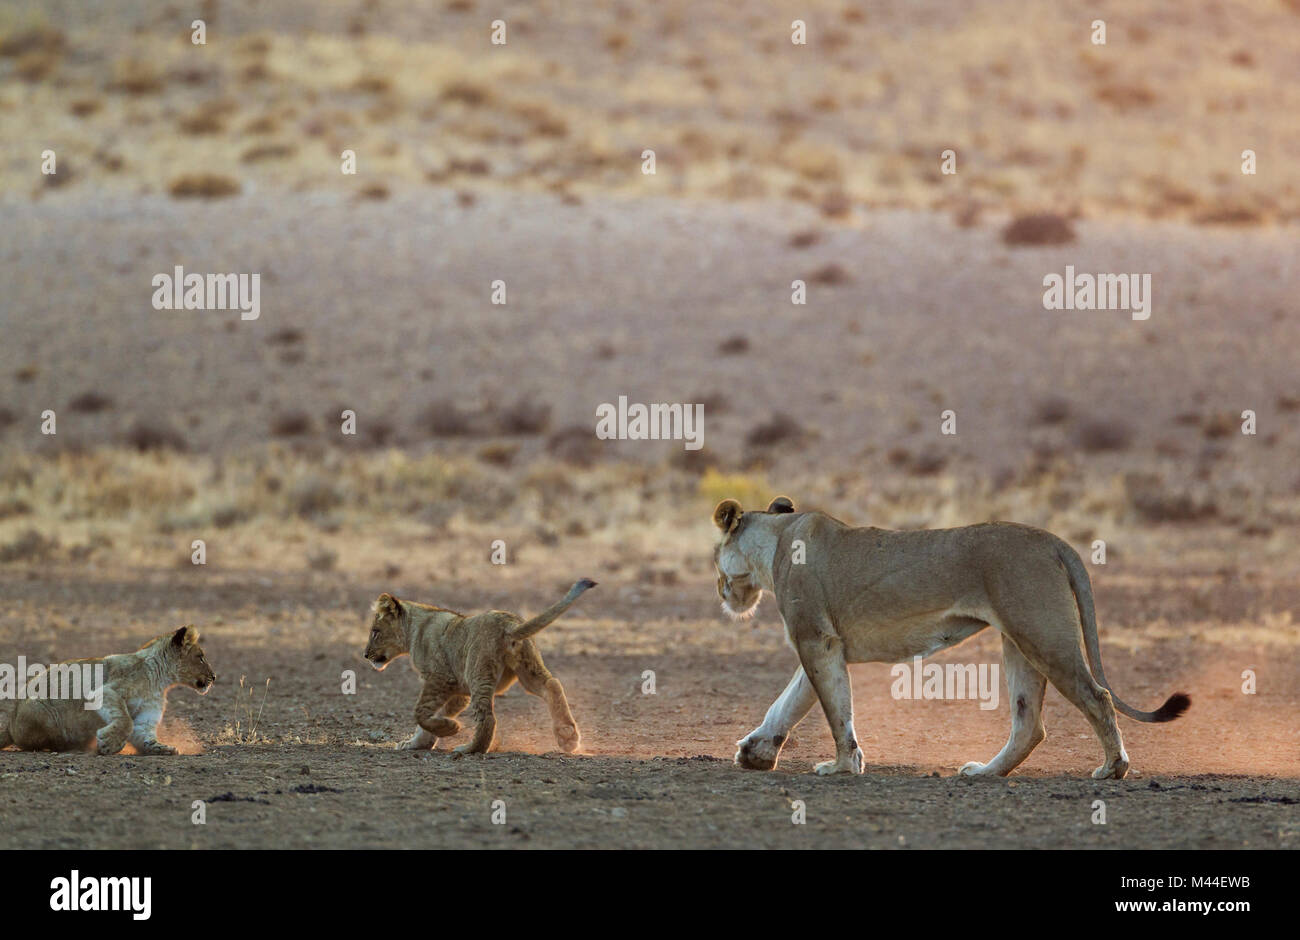 African Lion (Panthera leo). Female with two playful cubs in the light of the early morning. Kalahari Desert, Kgalagadi Transfrontier Park, South Africa. Stock Photo